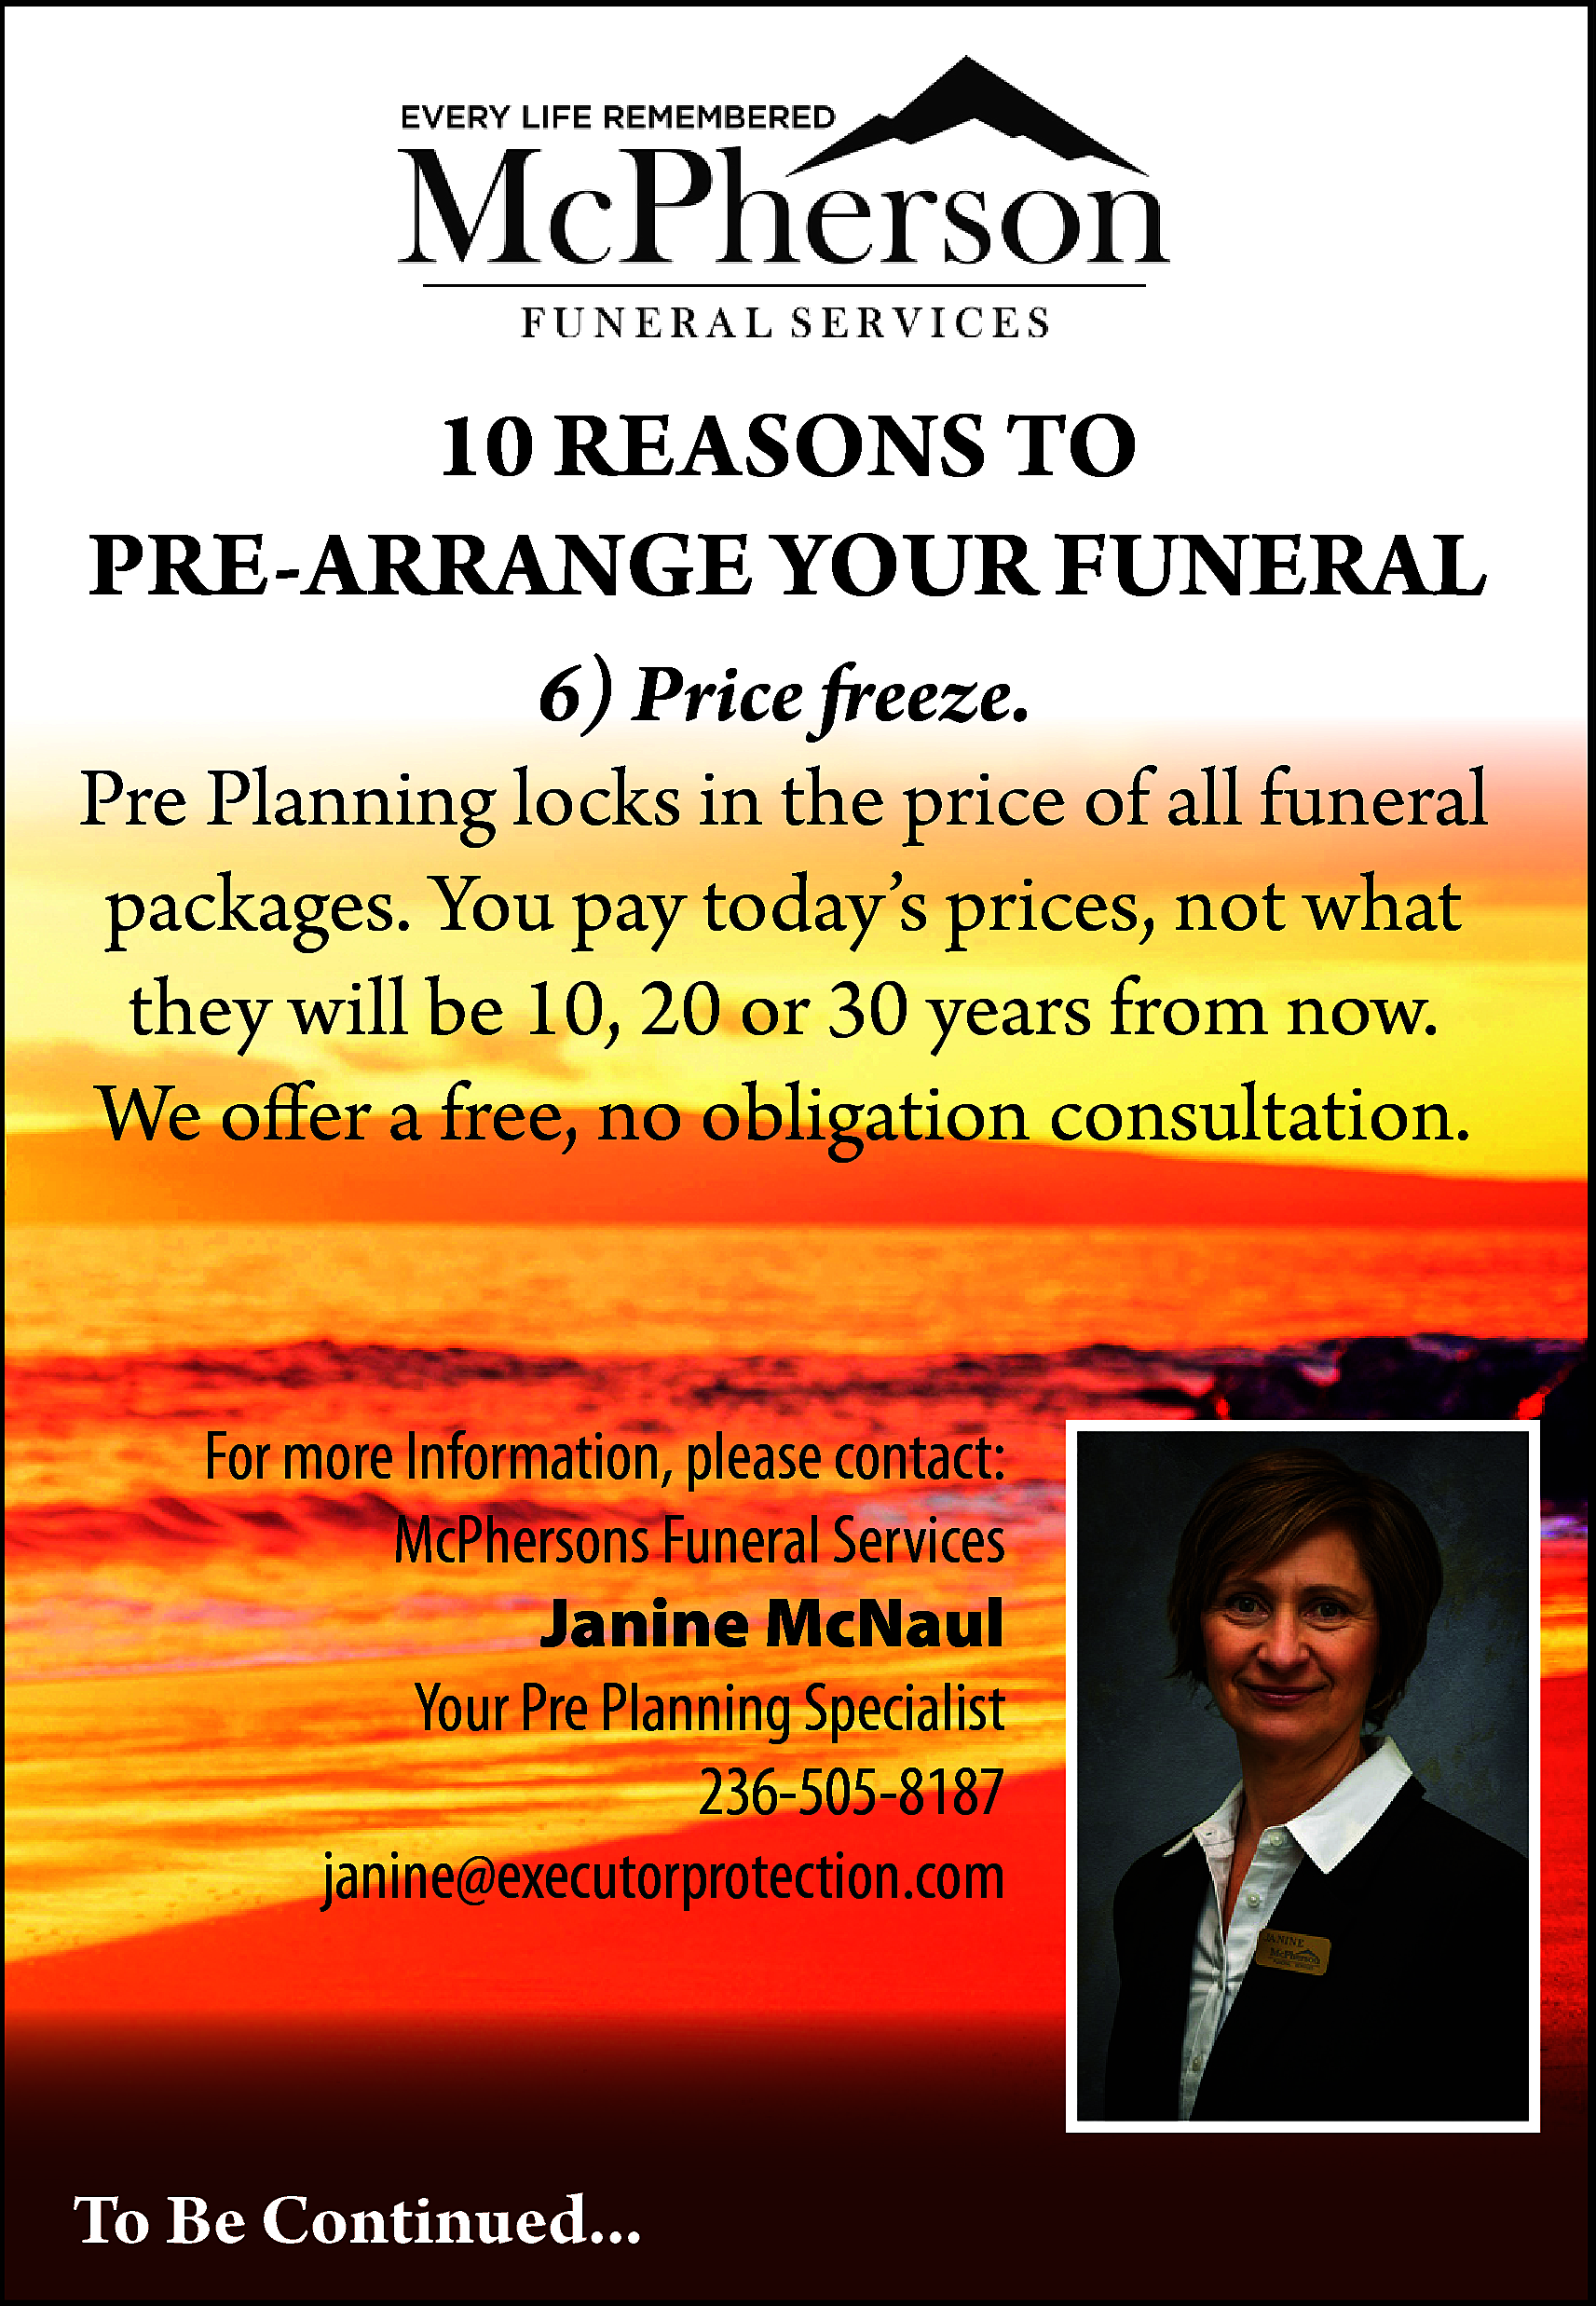 10 REASONS TO <br>PRE-ARRANGE YOUR  10 REASONS TO  PRE-ARRANGE YOUR FUNERAL  6) Price freeze.  Pre Planning locks in the price of all funeral  packages. You pay today’s prices, not what  they will be 10, 20 or 30 years from now.  We offer a free, no obligation consultation.    For more Information, please contact:  McPhersons Funeral Services  Janine McNaul  Your Pre Planning Specialist  236-505-8187  janine@executorprotection.com    To Be Continued...    